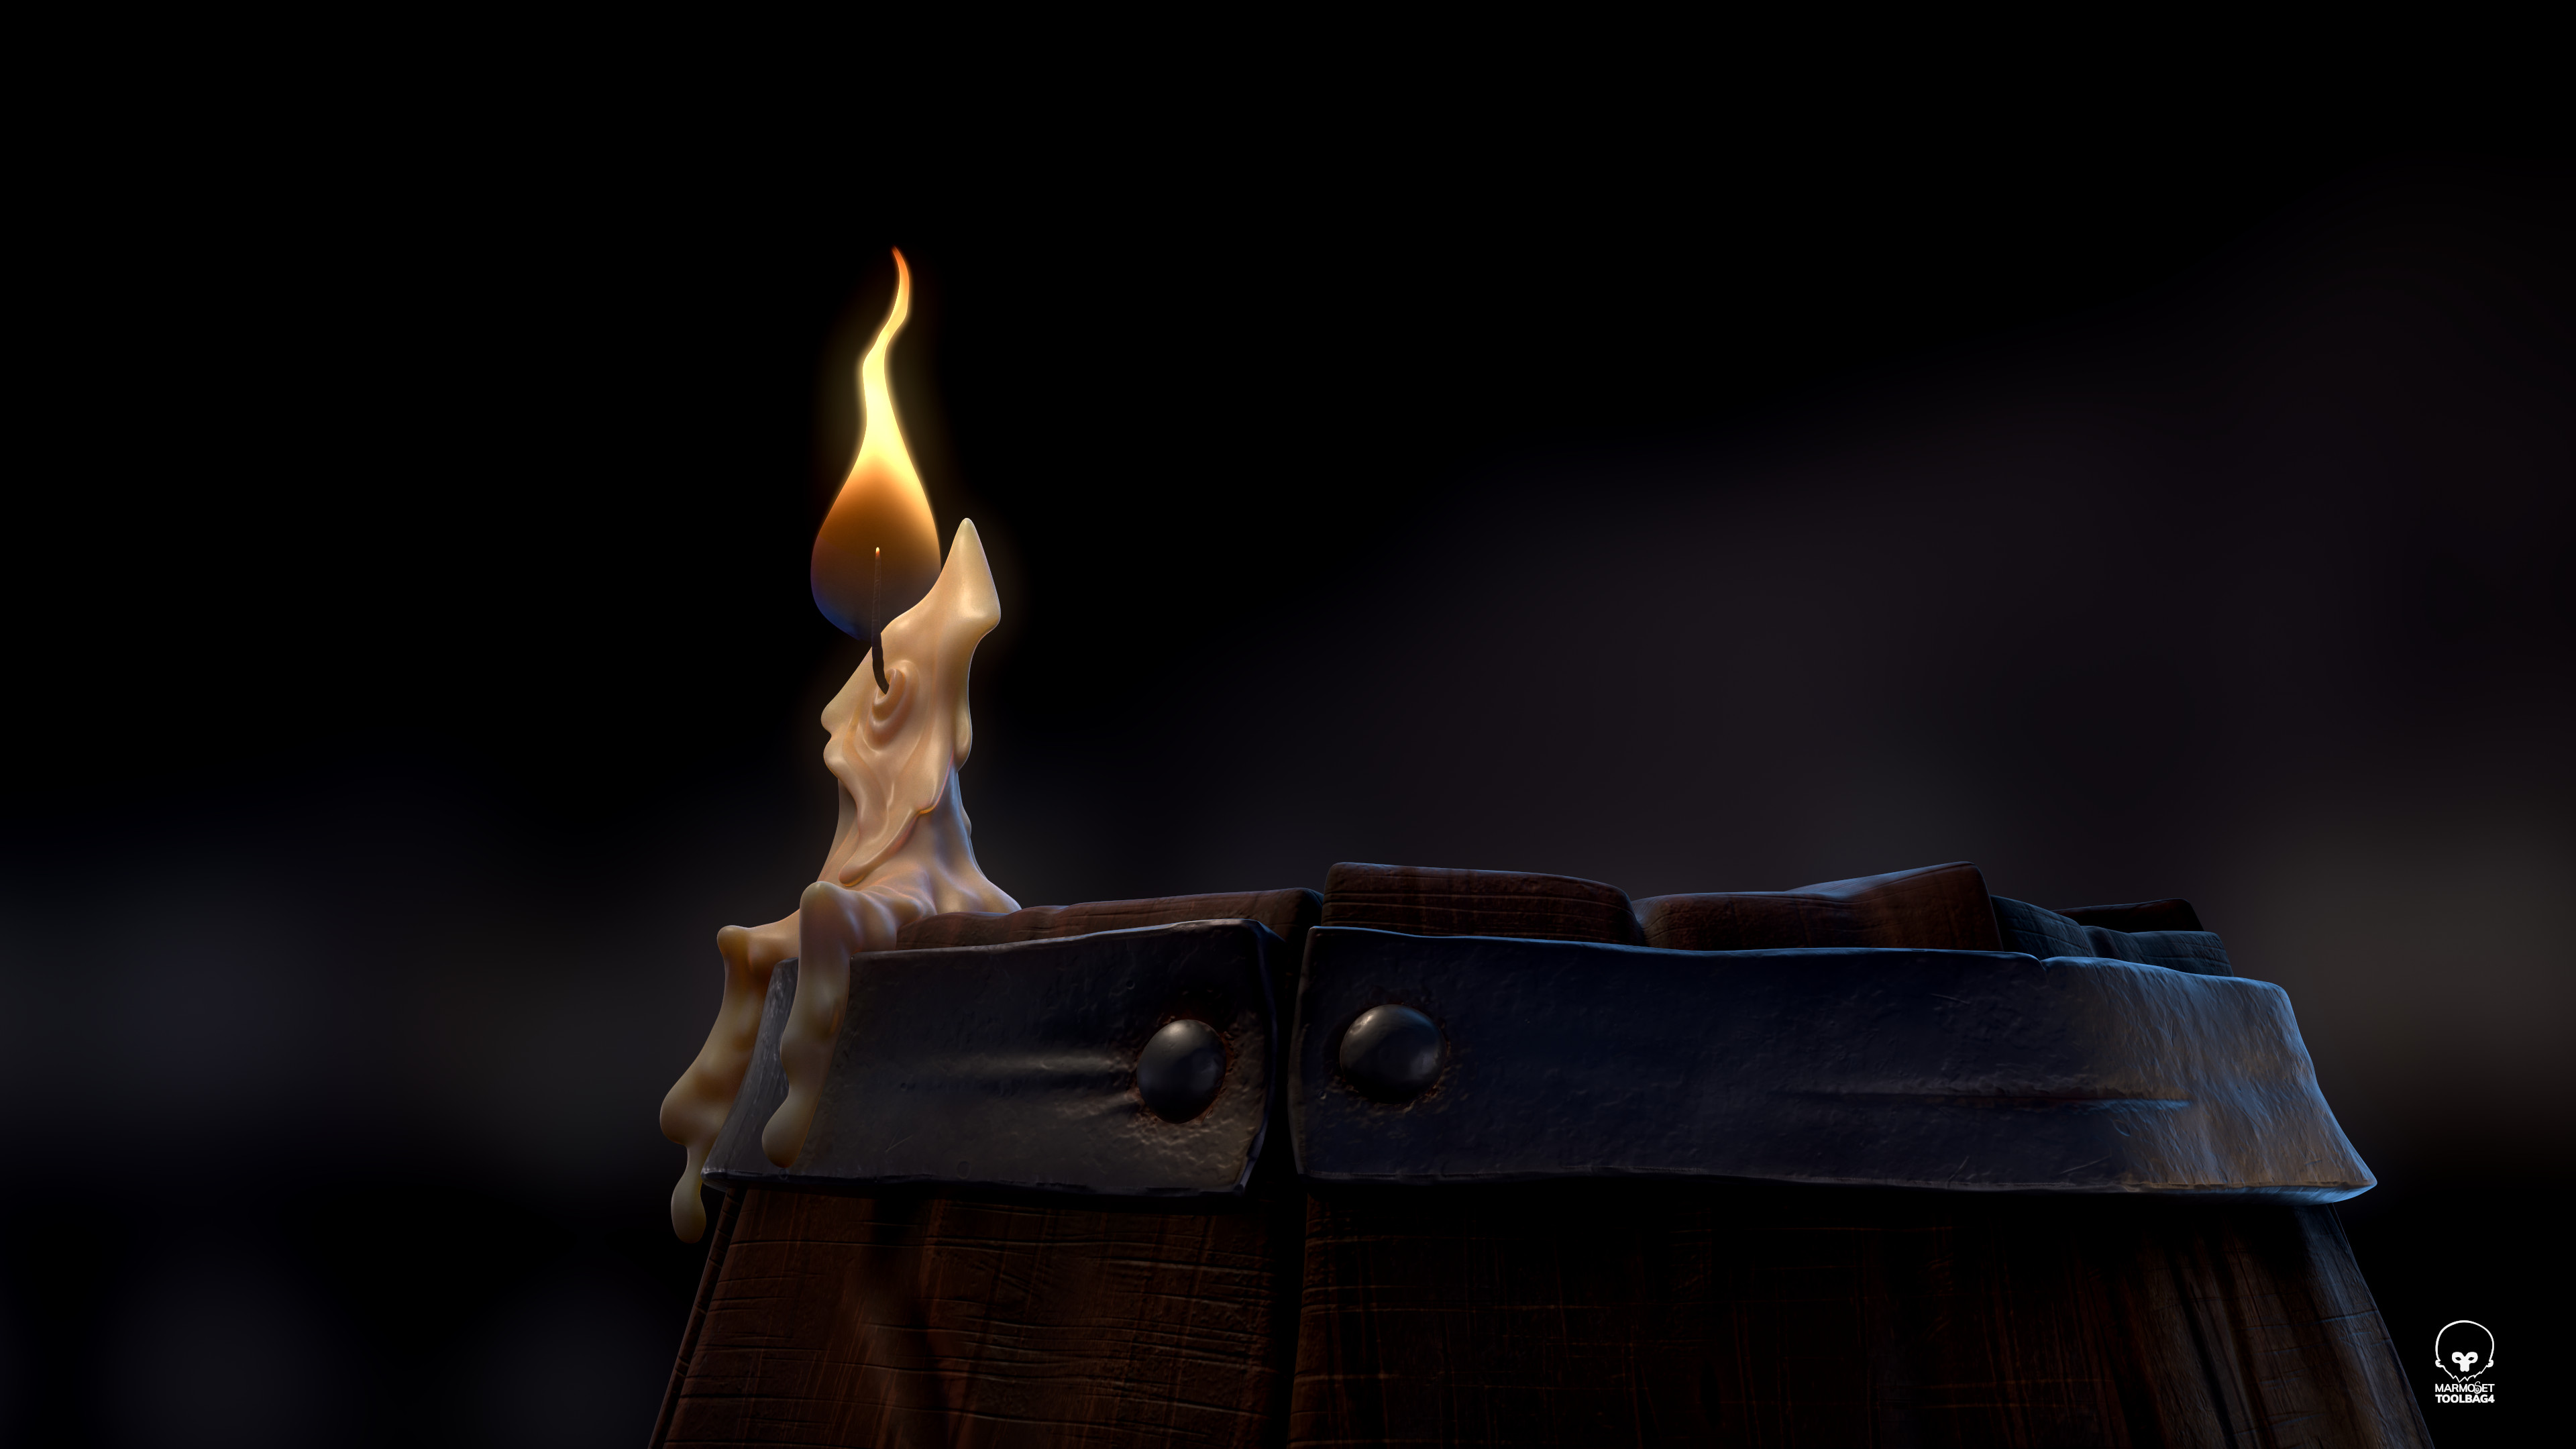 ArtStation - candle melting in hand